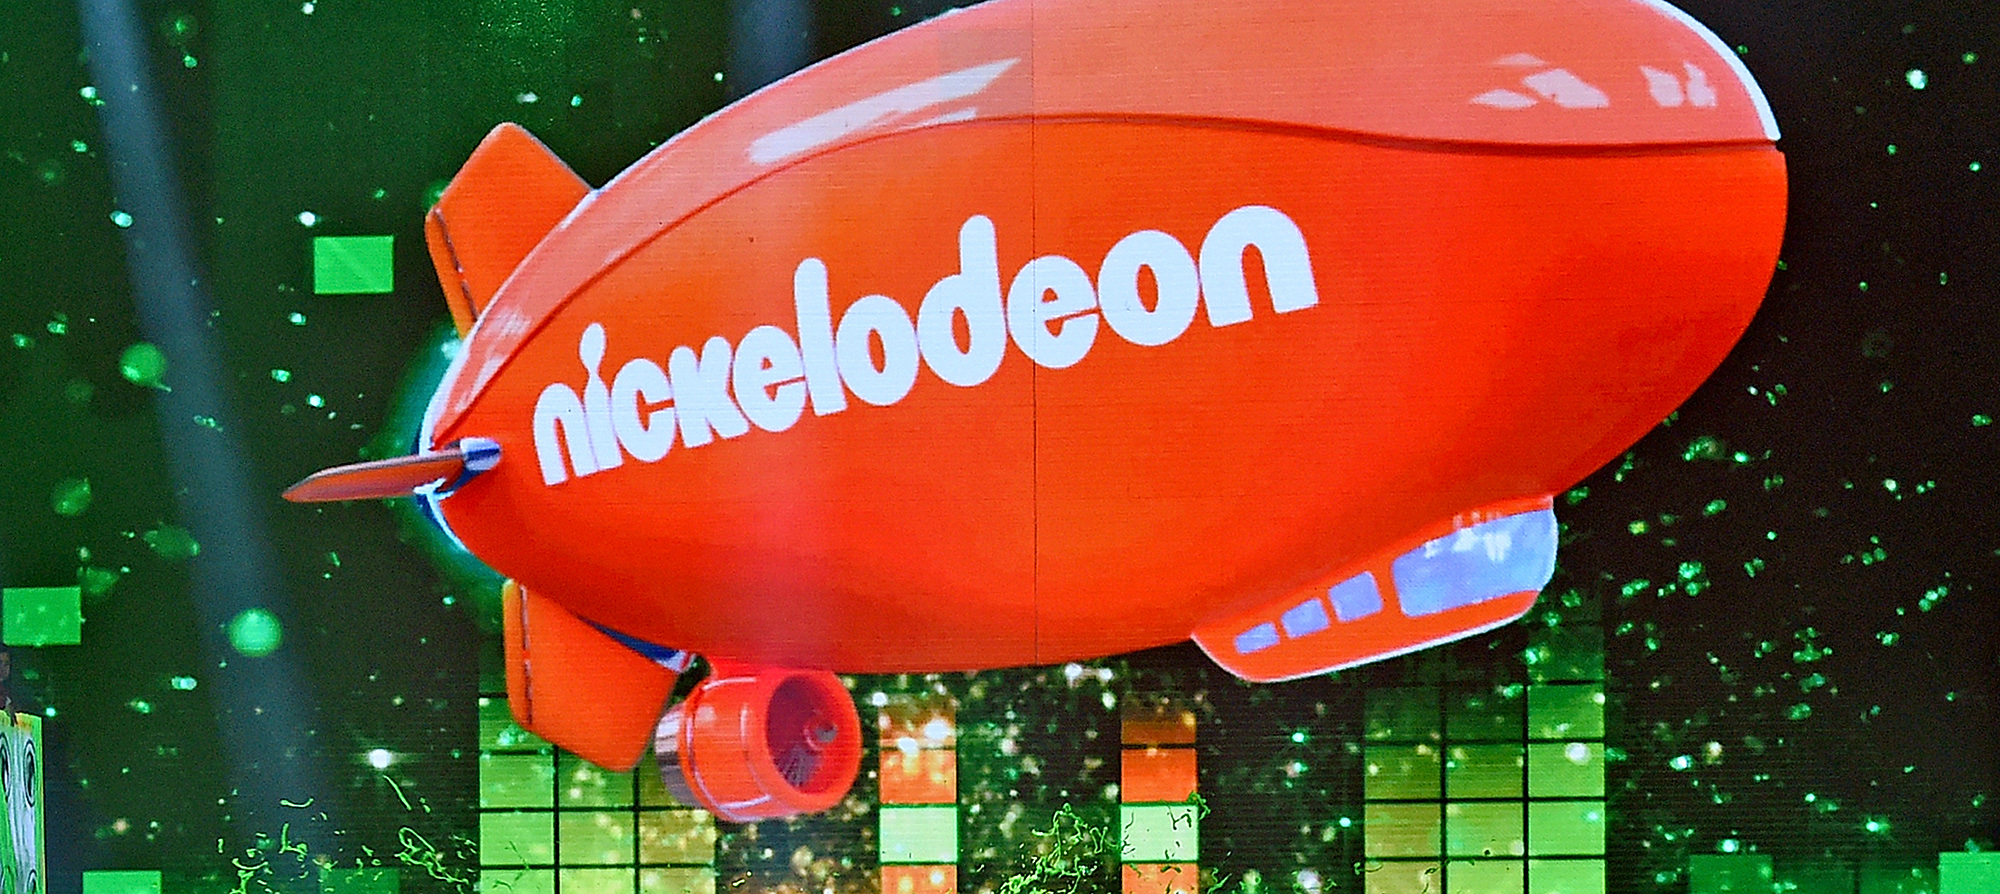 Plantage Riet geloof Viacom (VIA) Nickelodeon Acquires Sparkler in Pivot to Education - Bloomberg